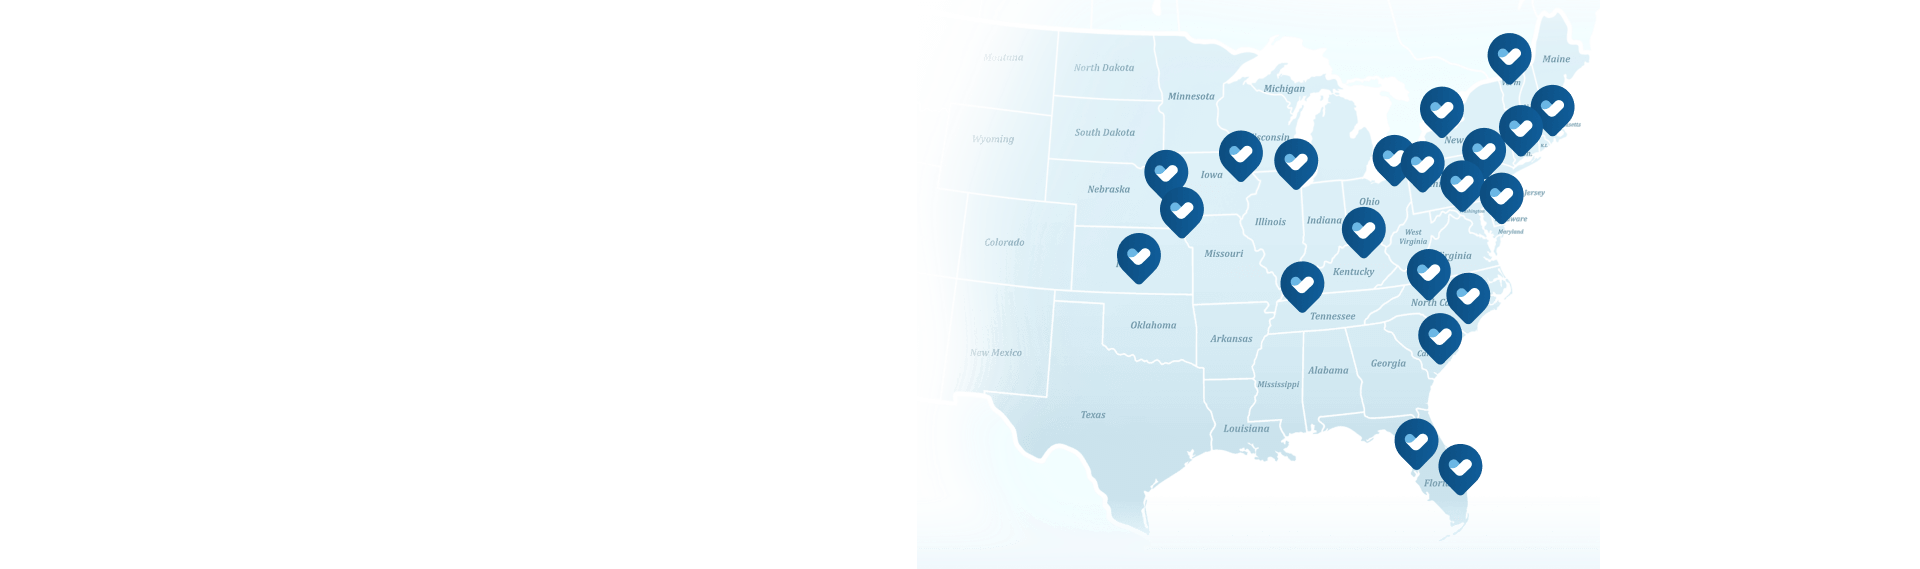 Map of United States with all PromptCare locations